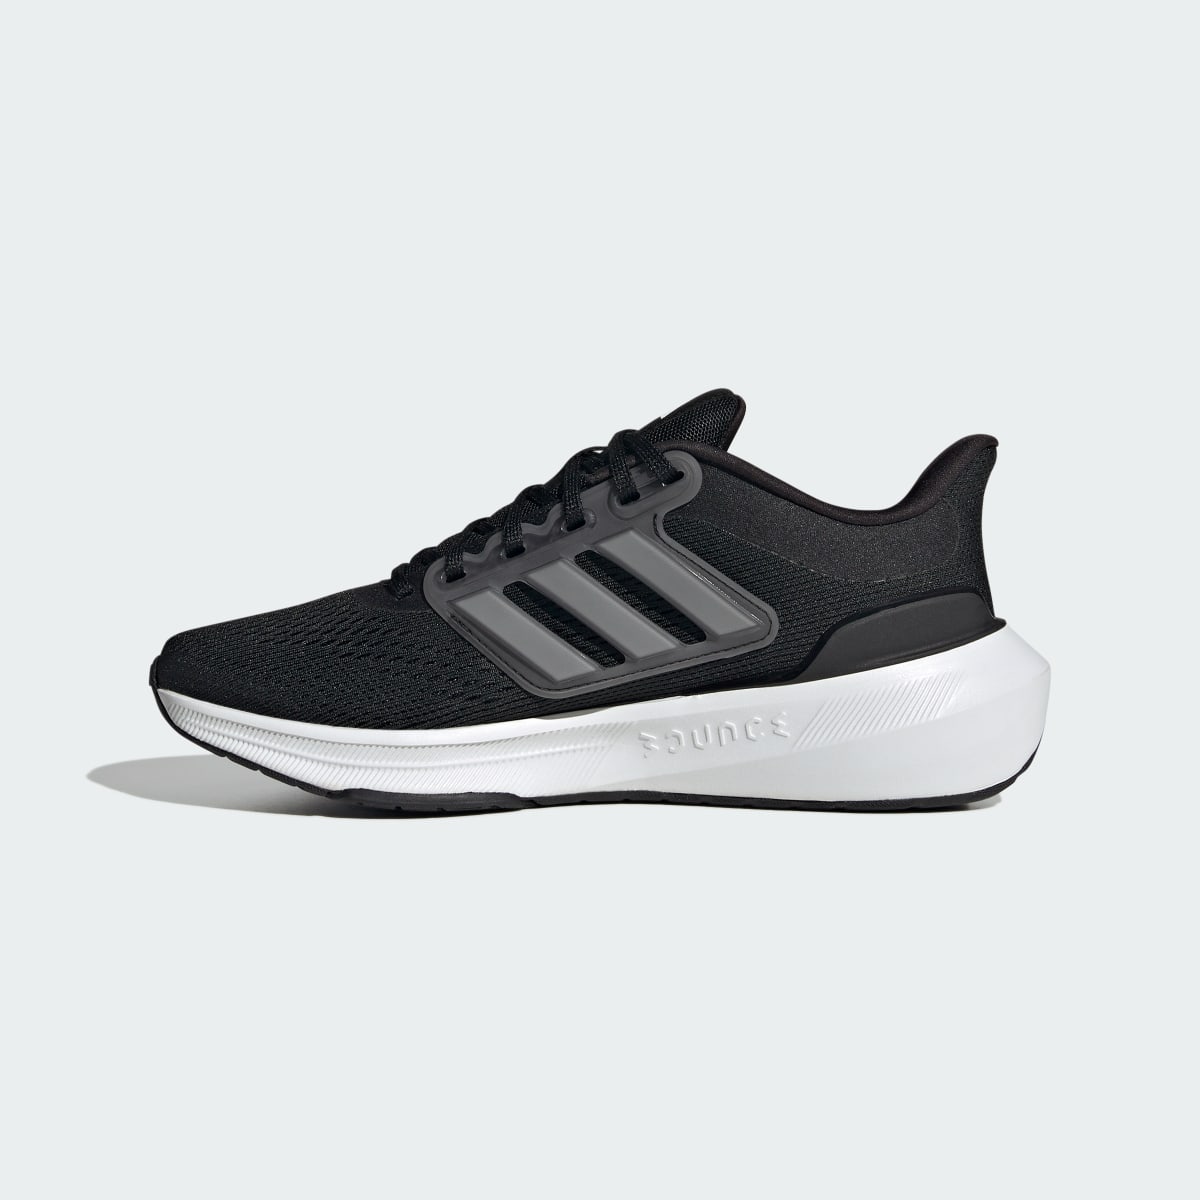 Adidas Chaussure Ultrabounce Chaussant large. 7